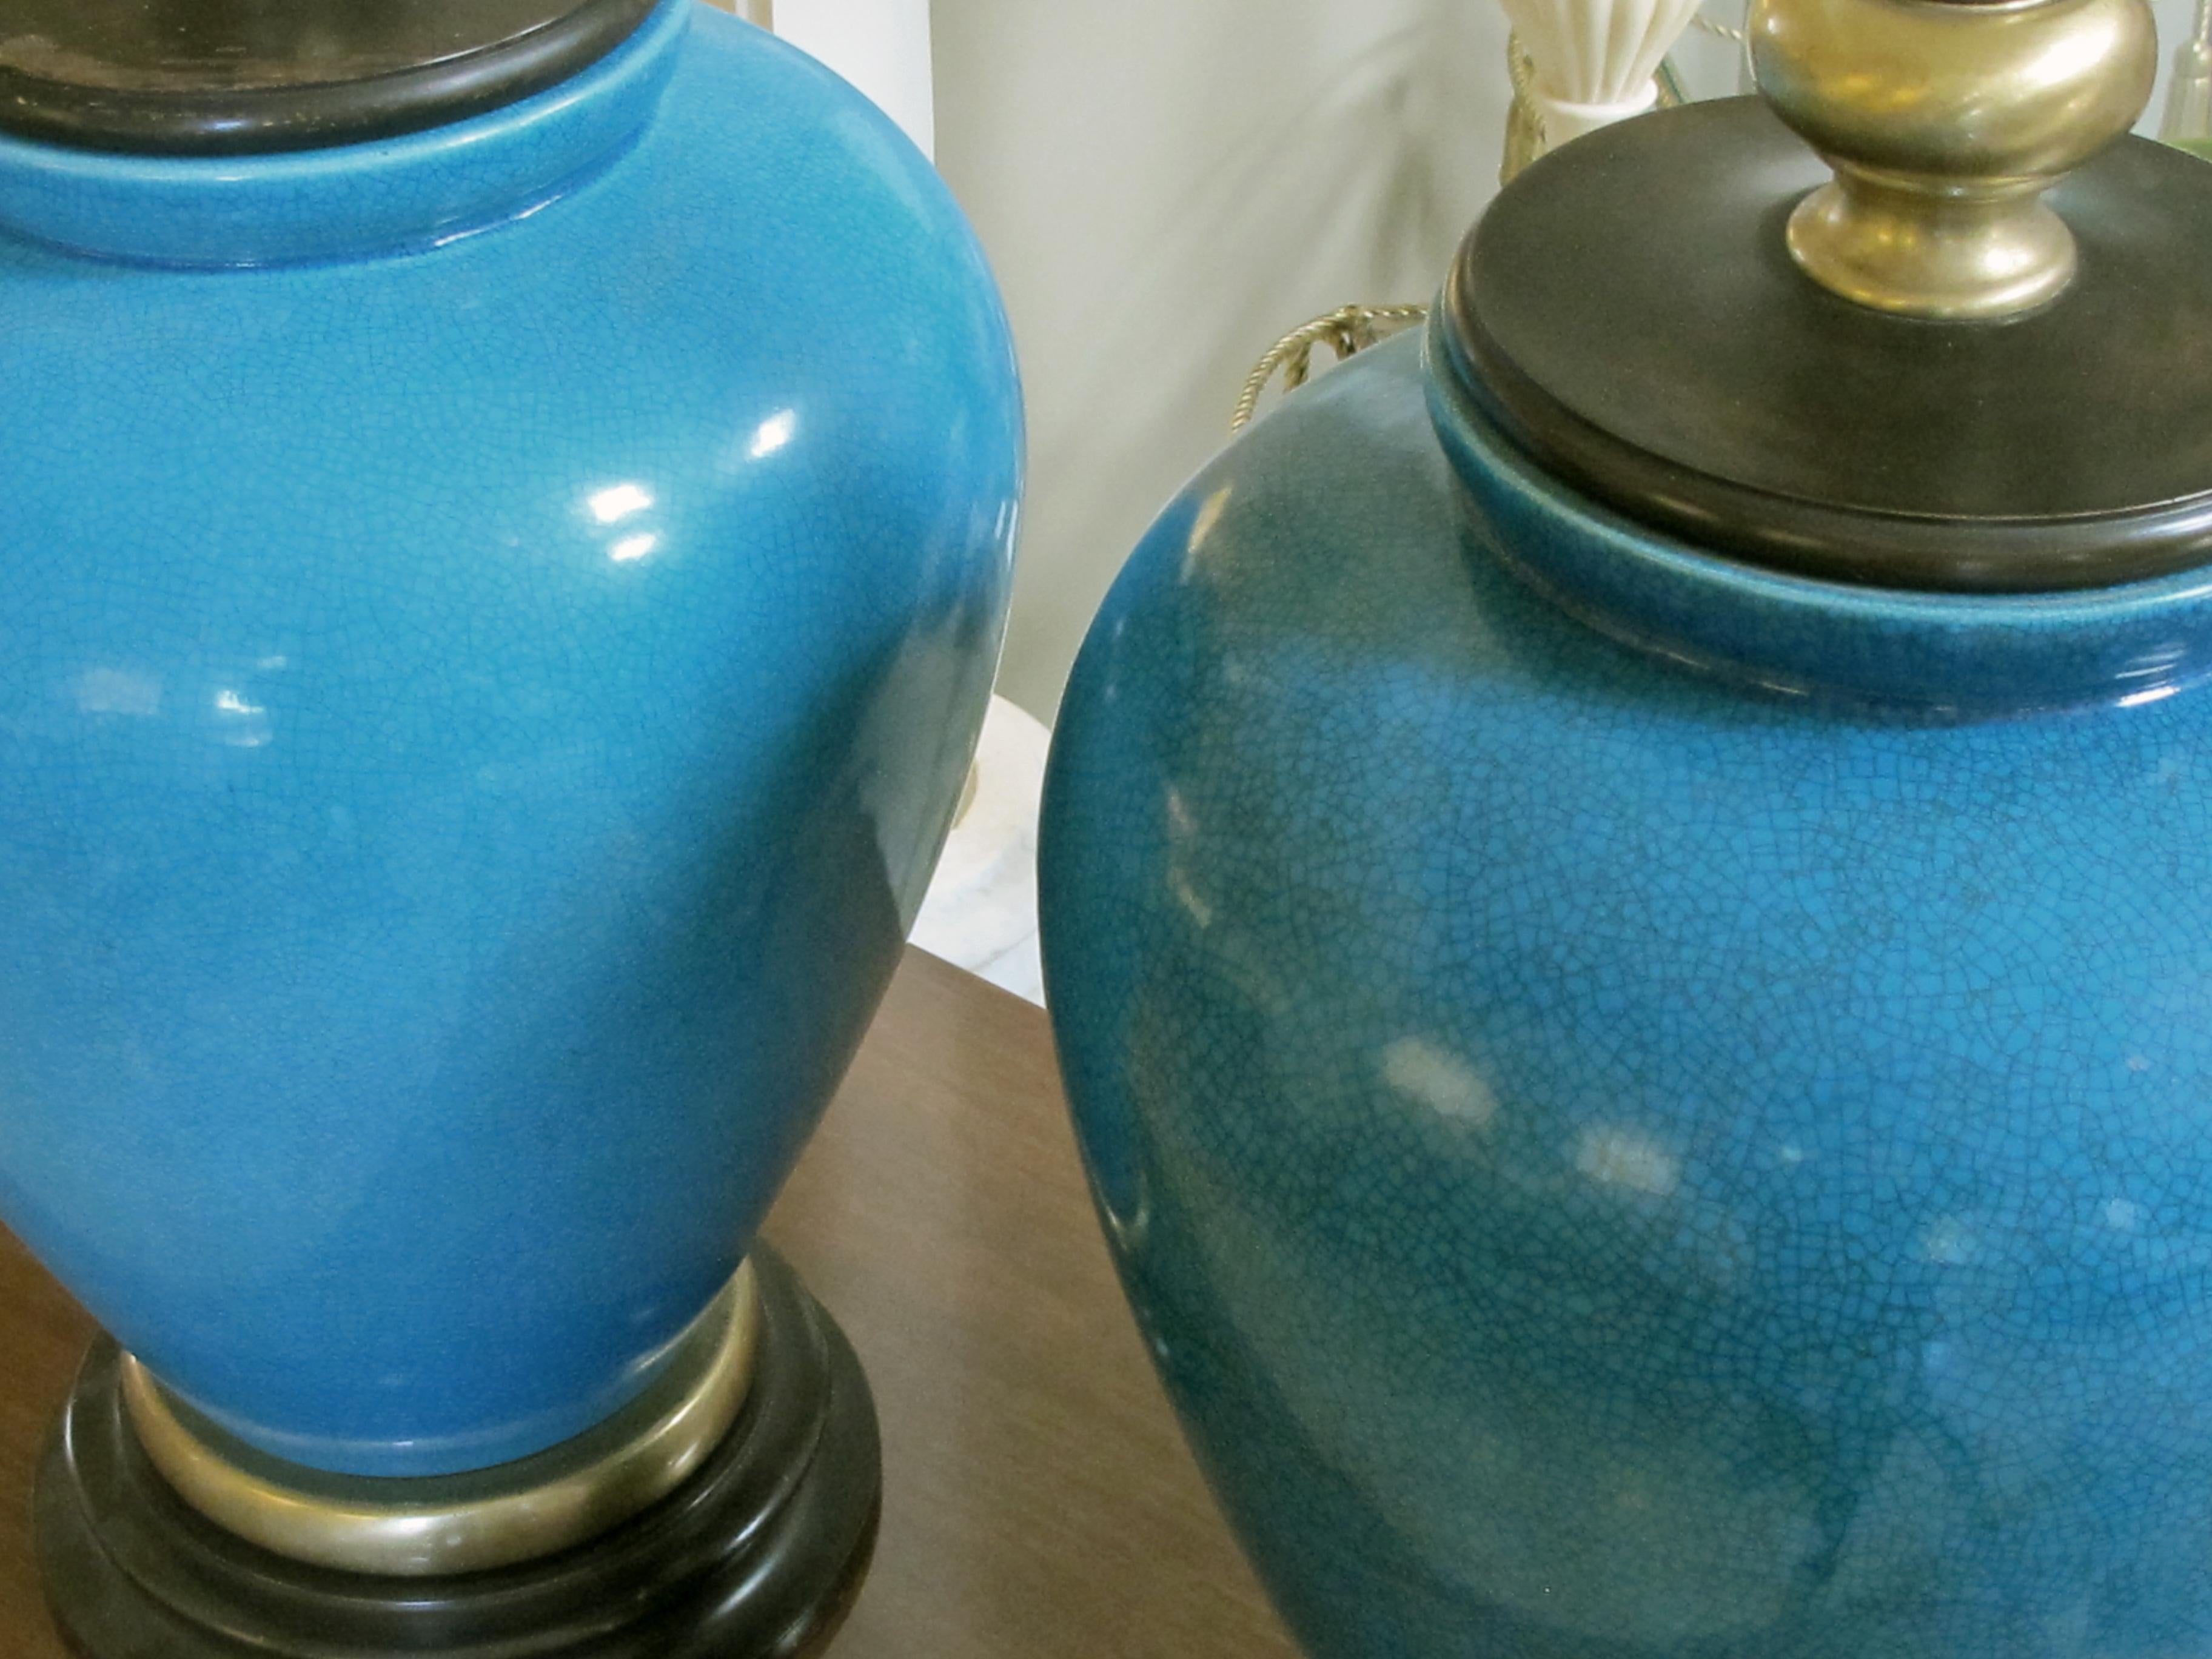 Striking American Turquoise Crackle-Glaze Ceramic Lamps, Frederick Cooper, Pair For Sale 2